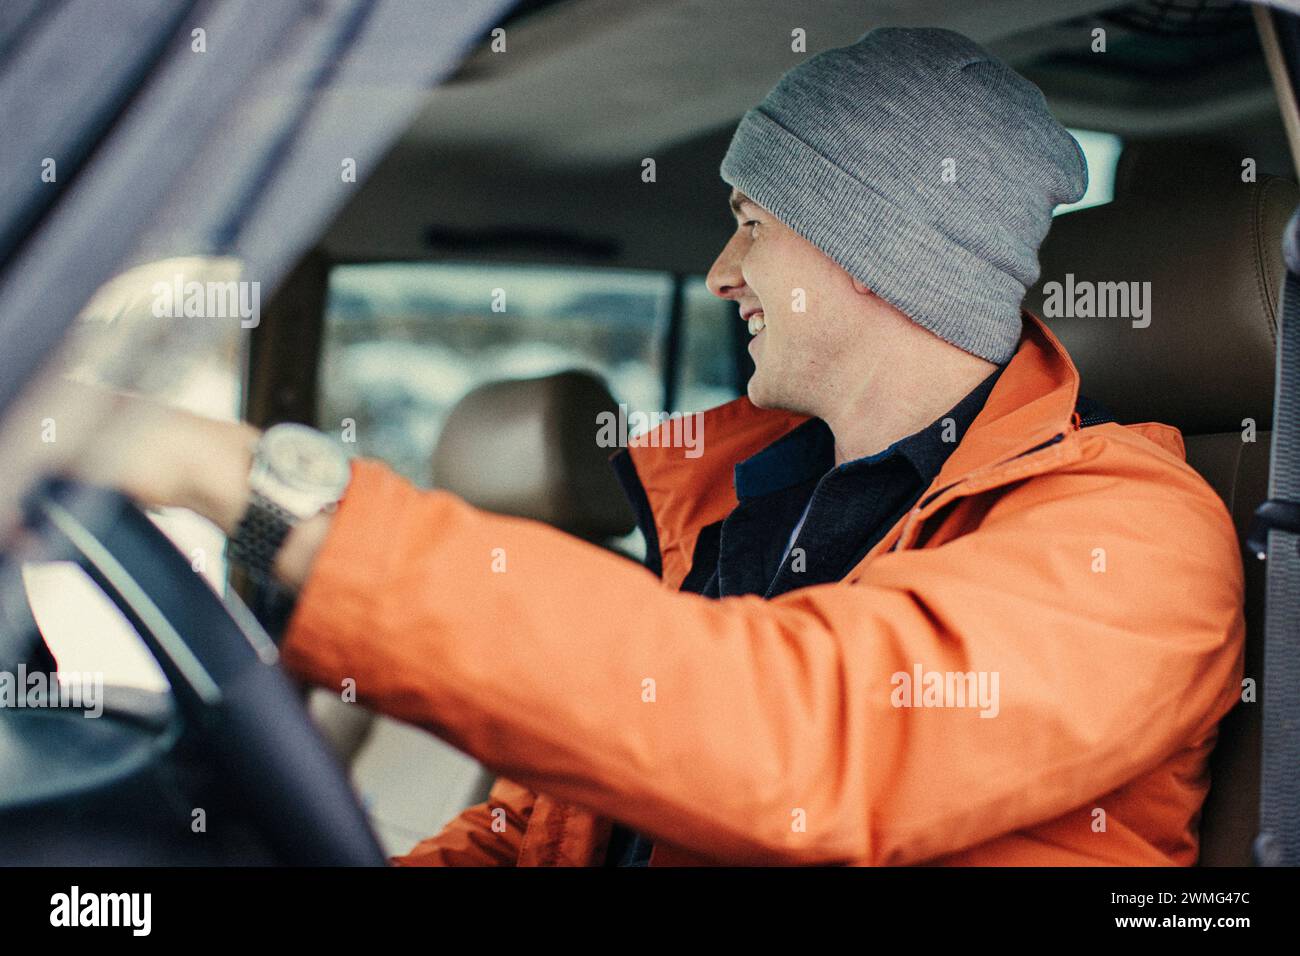 A Caucasian young male smiles while sitting inside a vehicle. Stock Photo